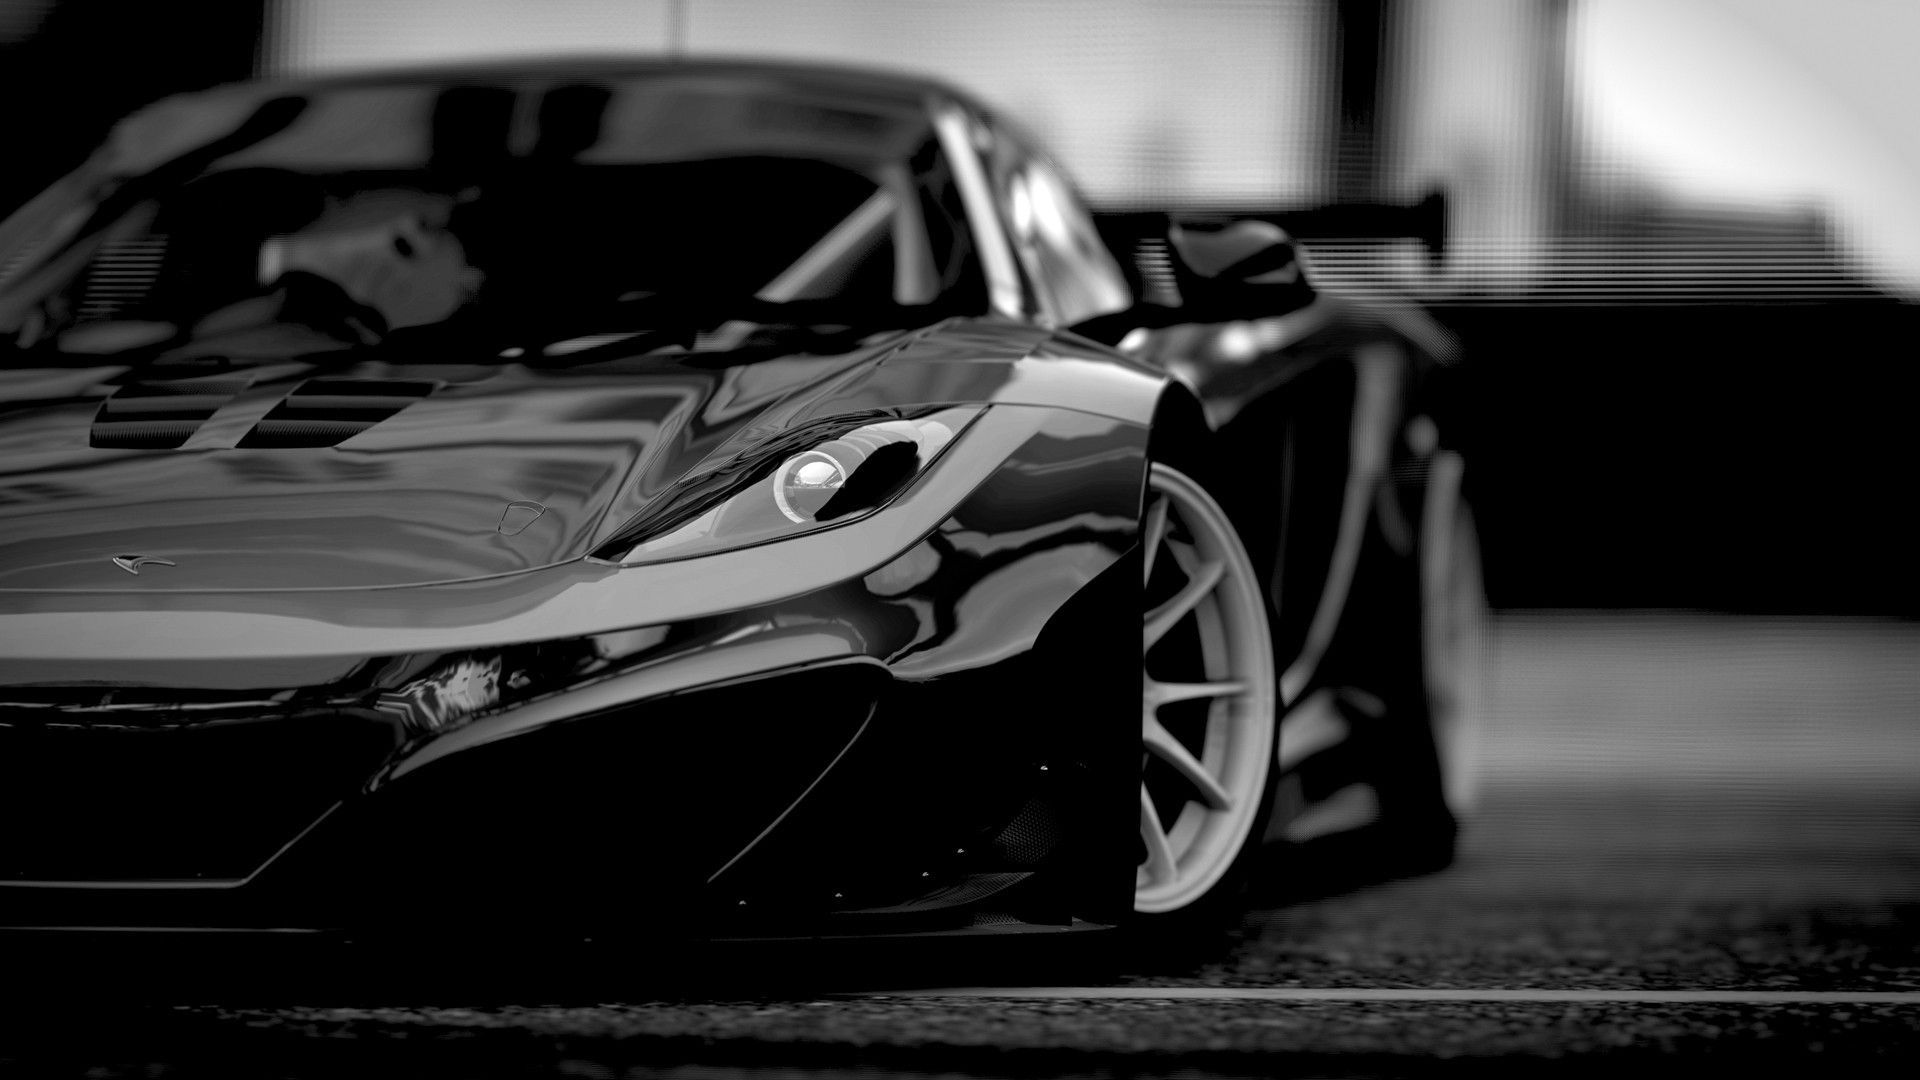 Black and White Car Wallpaper Free Black and White Car Background